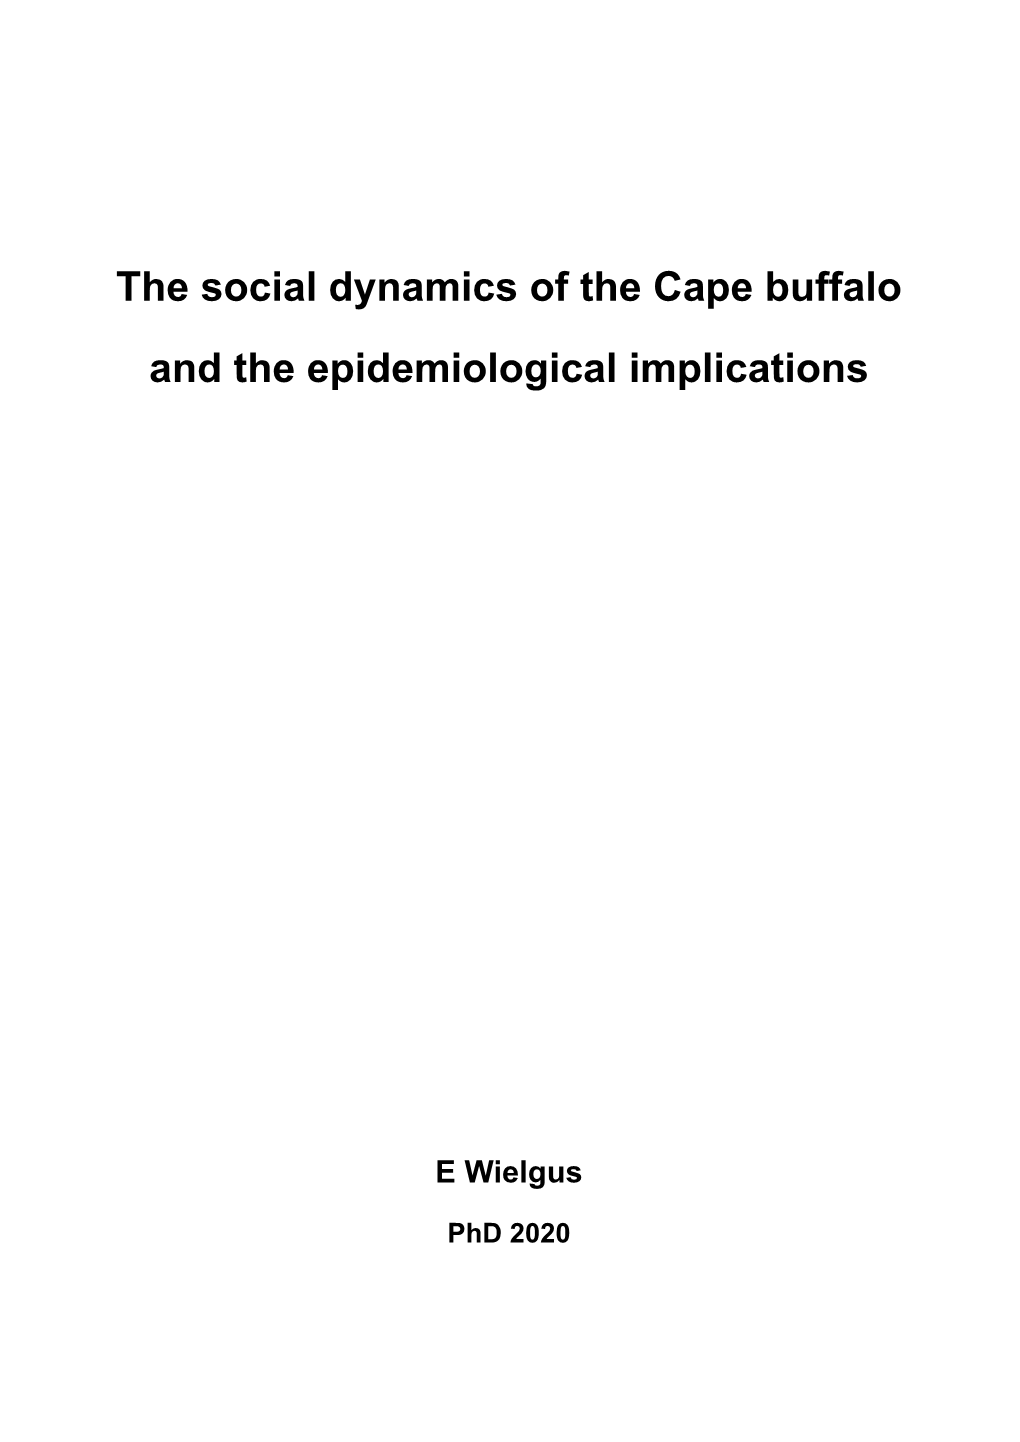 The Social Dynamics of the Cape Buffalo and the Epidemiological Implications